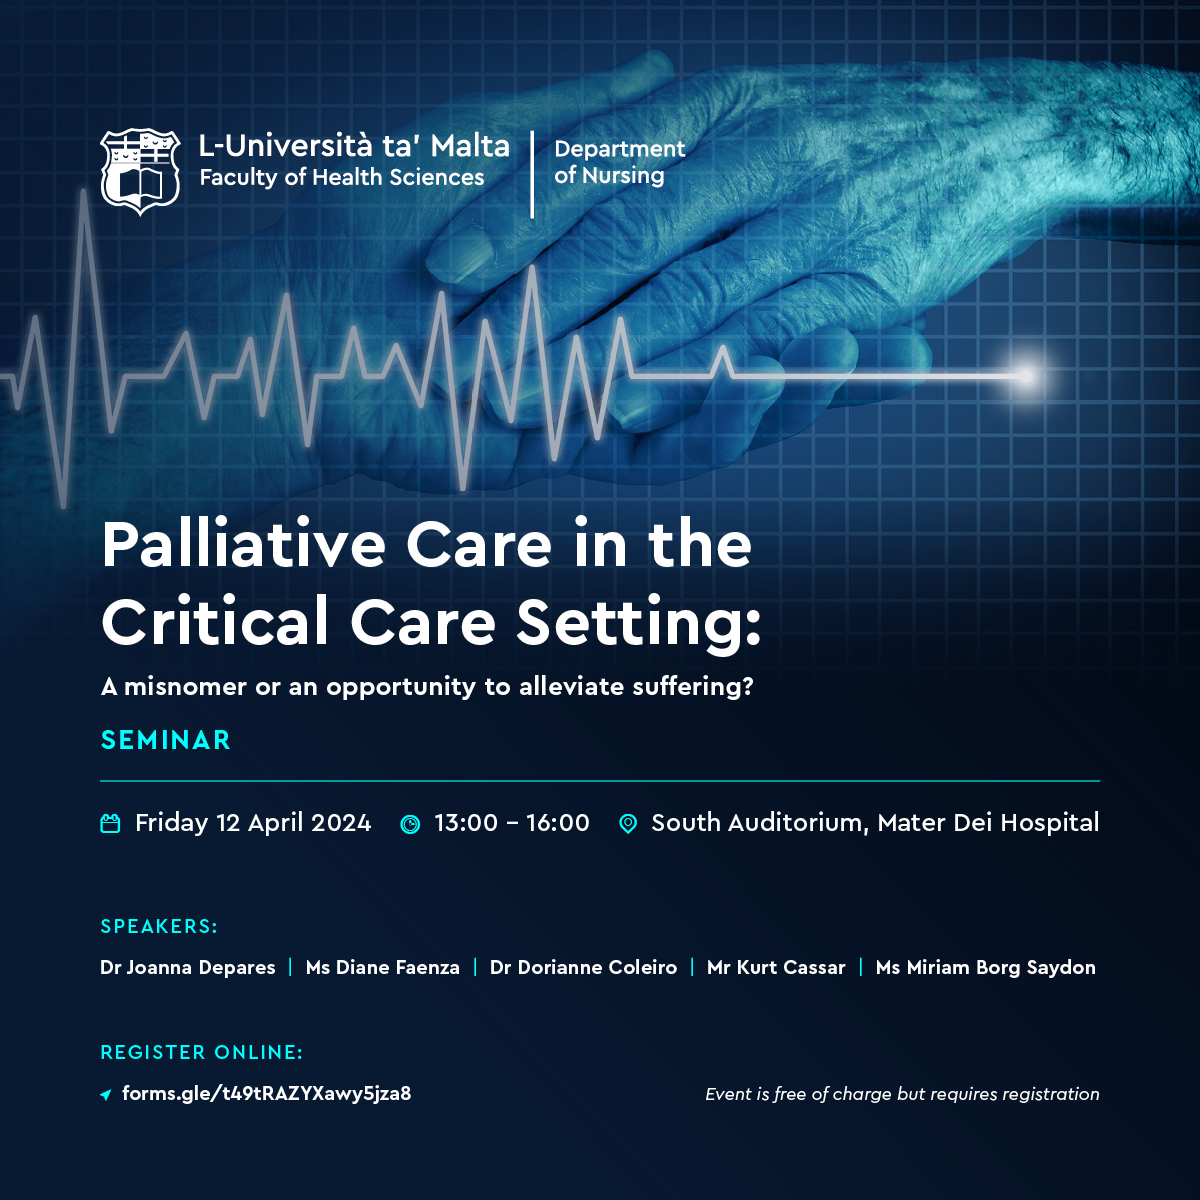 📢SEMINAR on #PalliativeCare in critical care settings MORE INFO: facebook.com/events/1088909… REGISTRATION: forms.gle/t49tRAZYXawy5j…